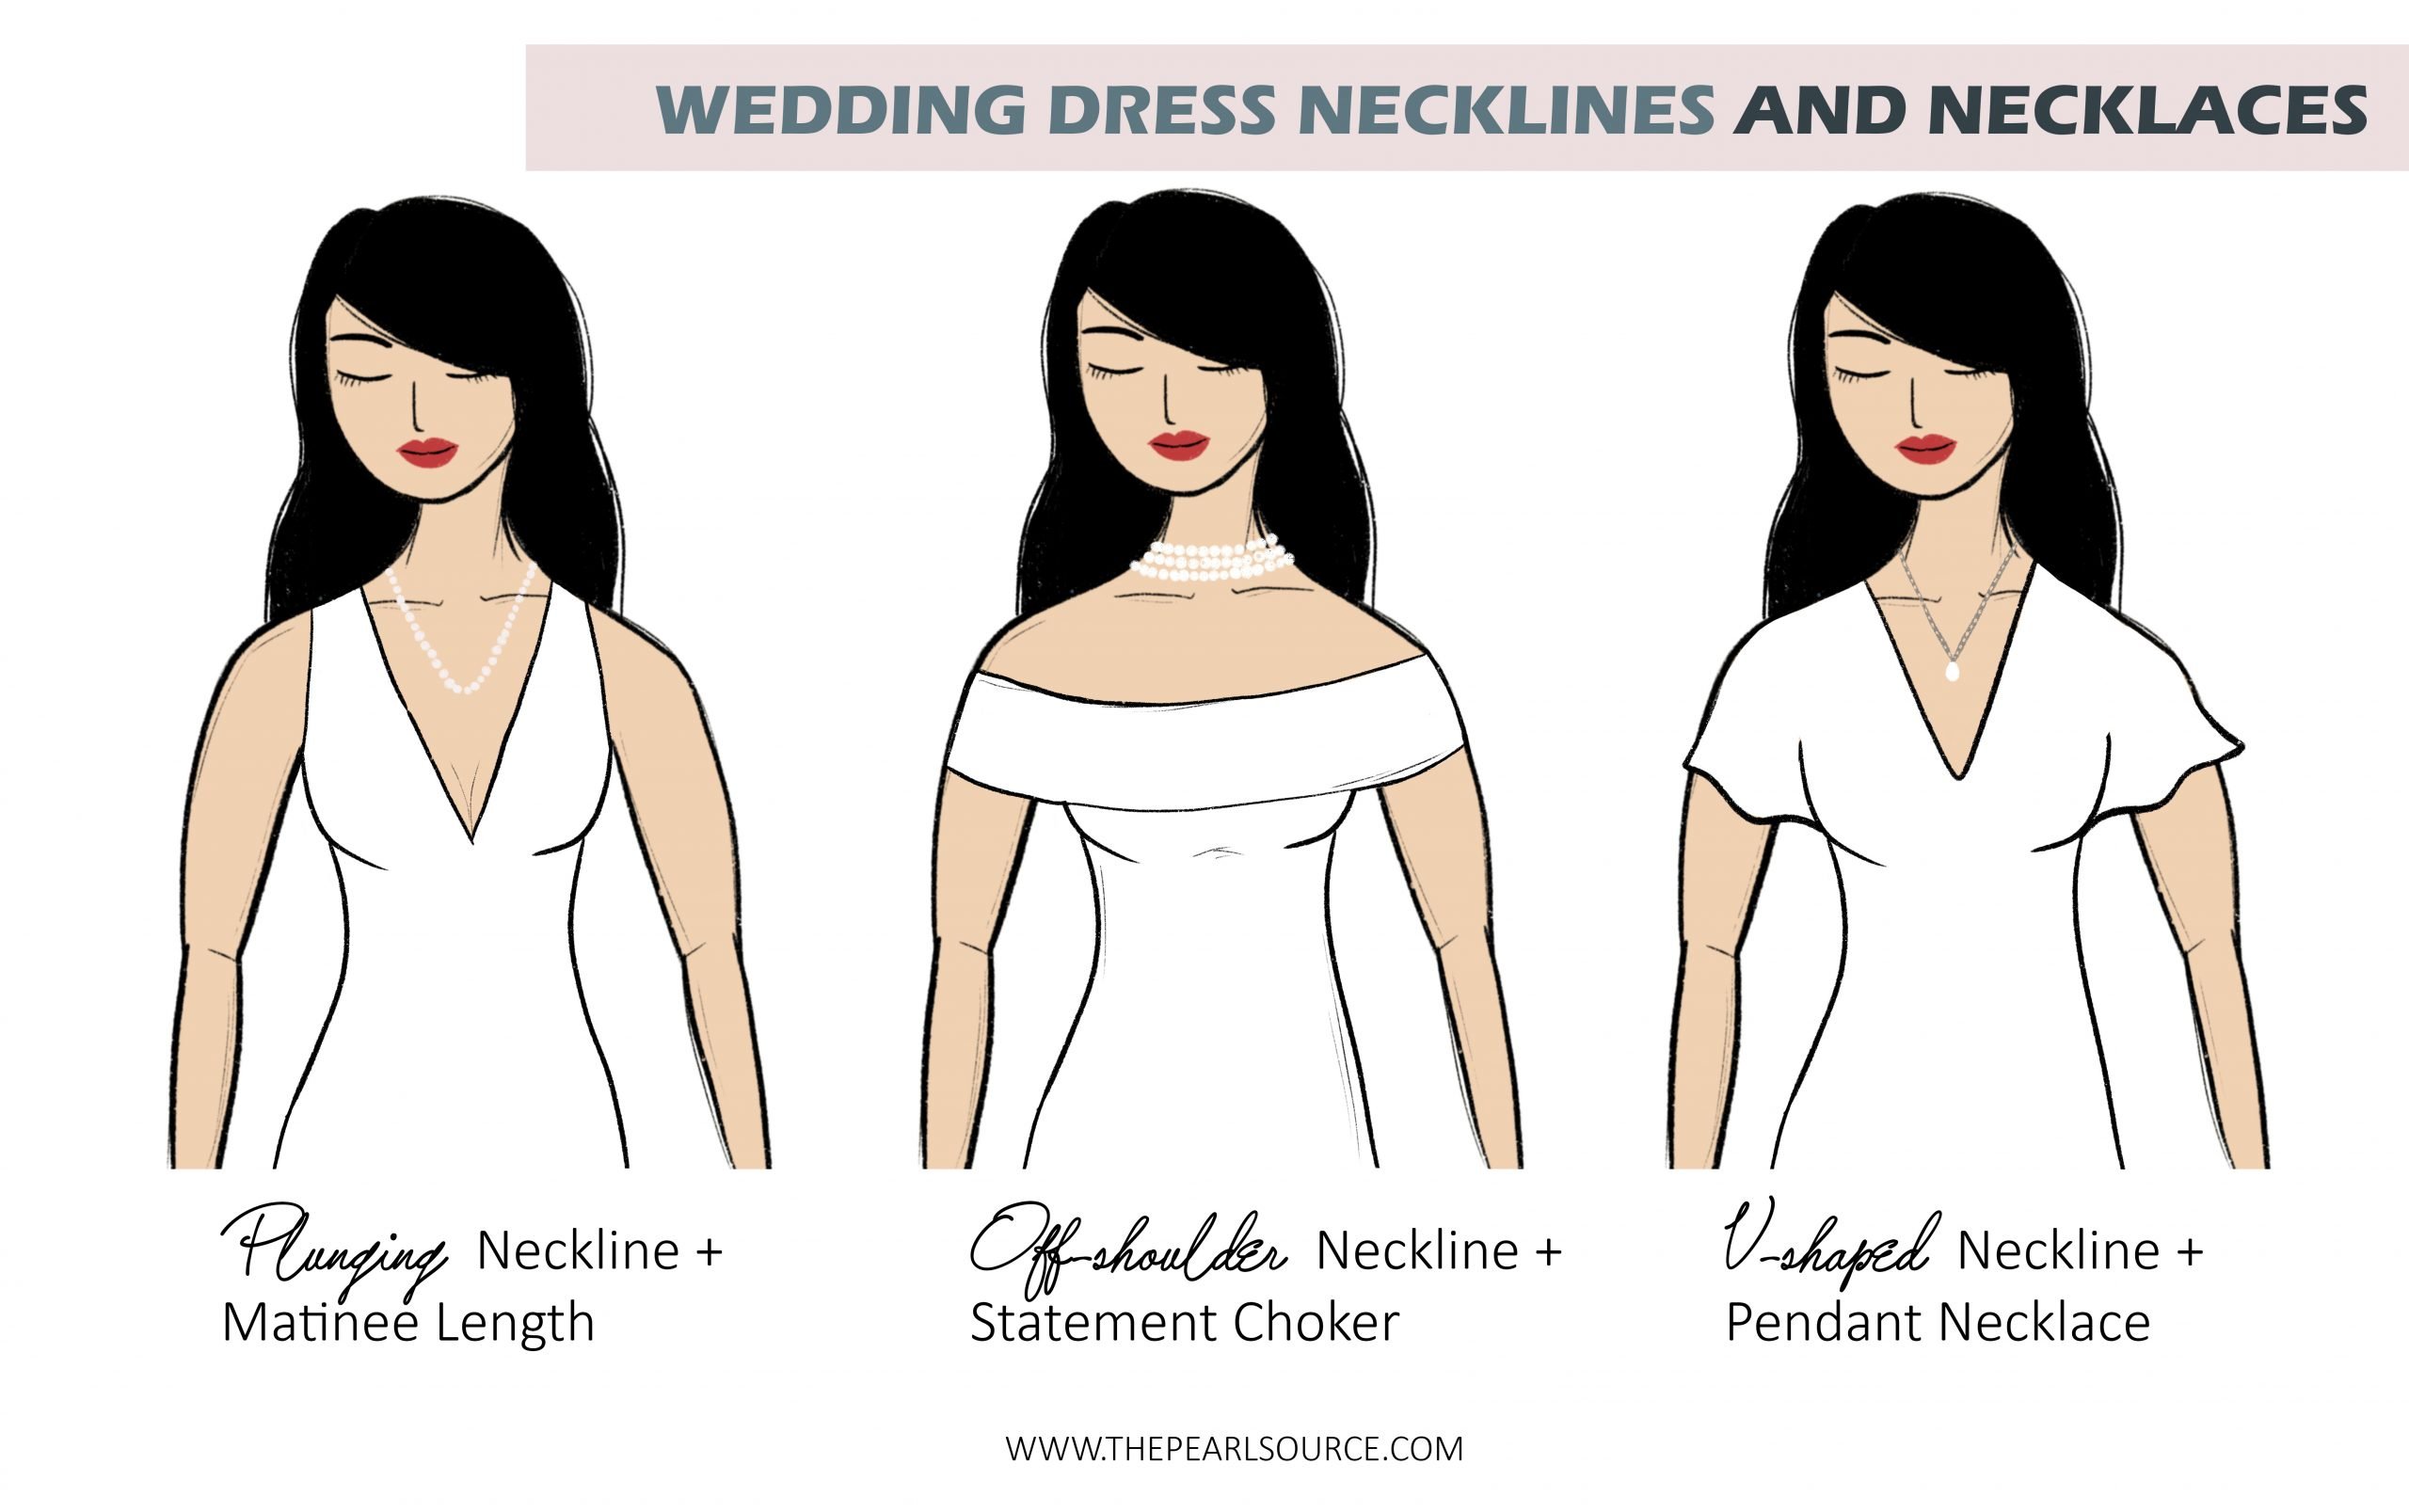 What Jewelry to Wear with V-Neck Wedding Dress? - Ask Emmaline | Moonstone  necklace, Wedding necklace, Gold choker necklace